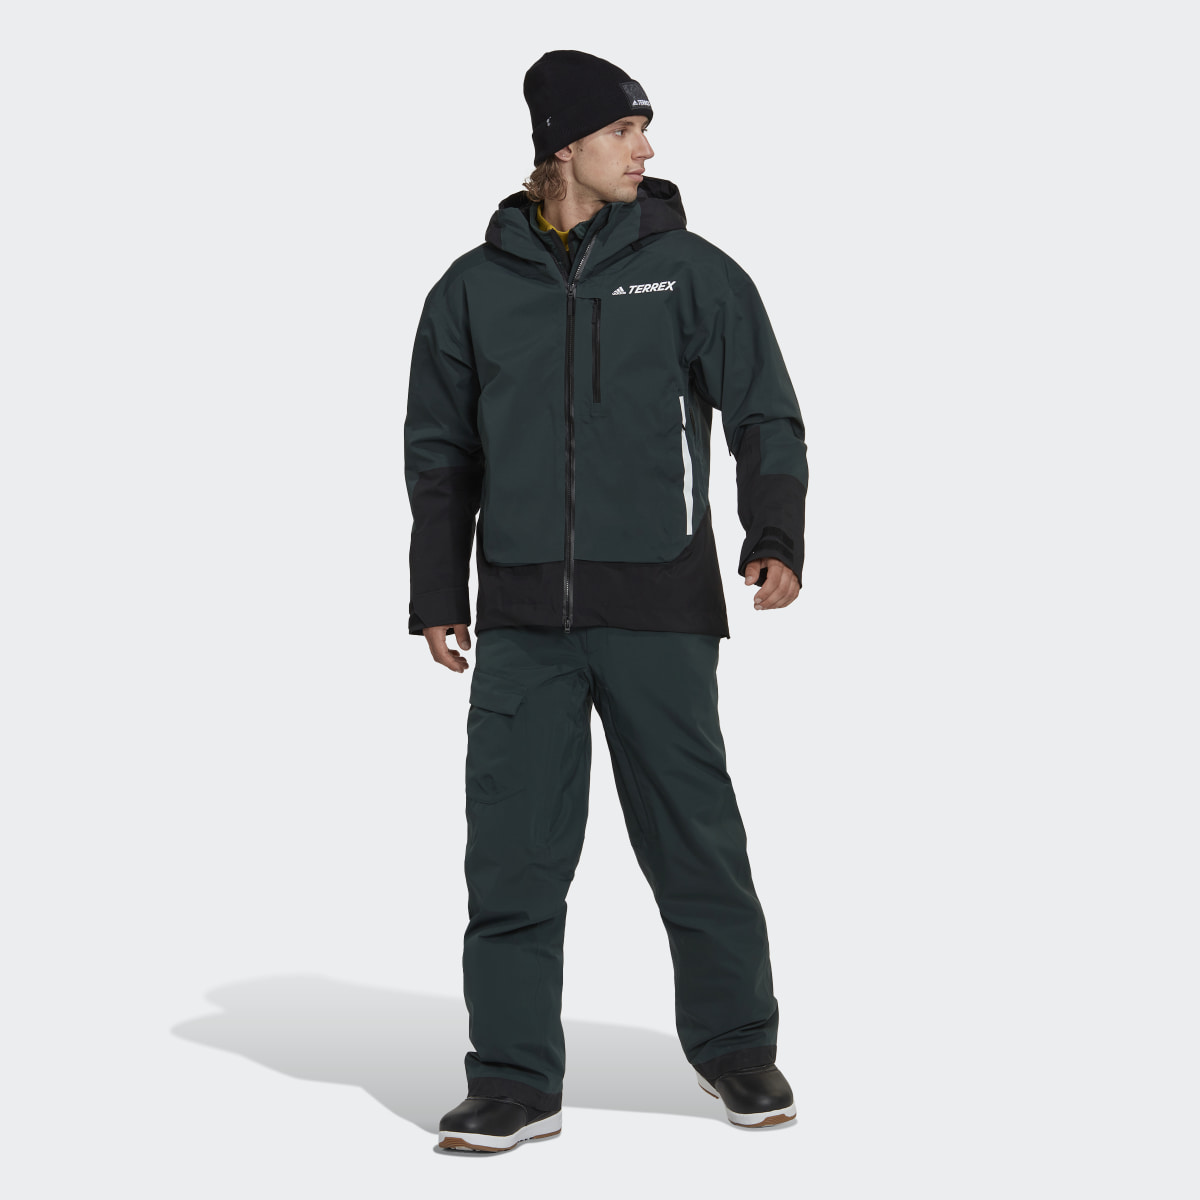 Adidas TERREX RESORT TWO LAYER INSULATED SNOW PANTS. 5